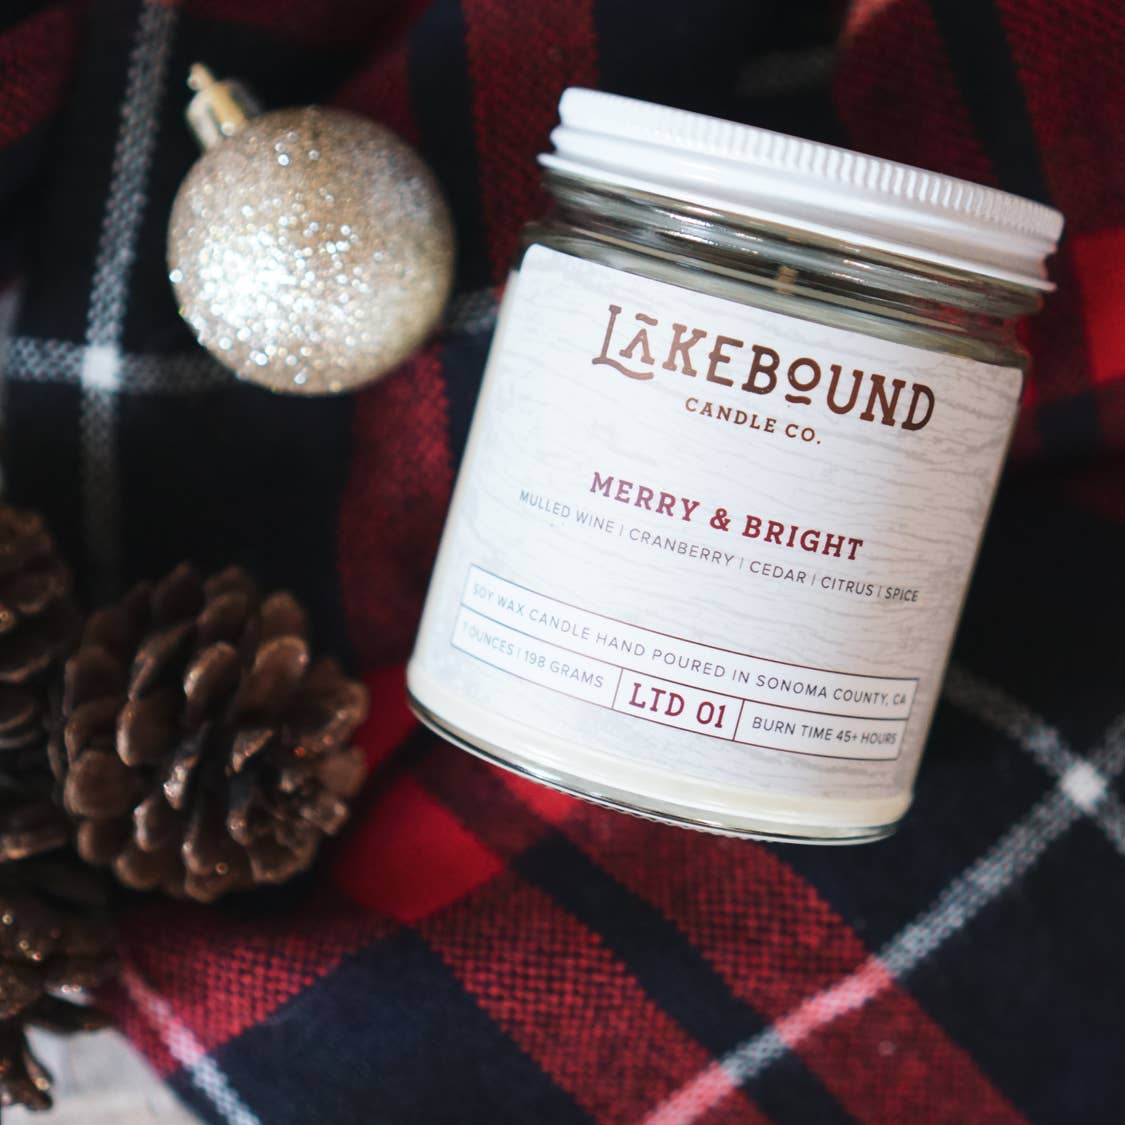 Merry & Bright Soy Candle Lakebound Candle Co